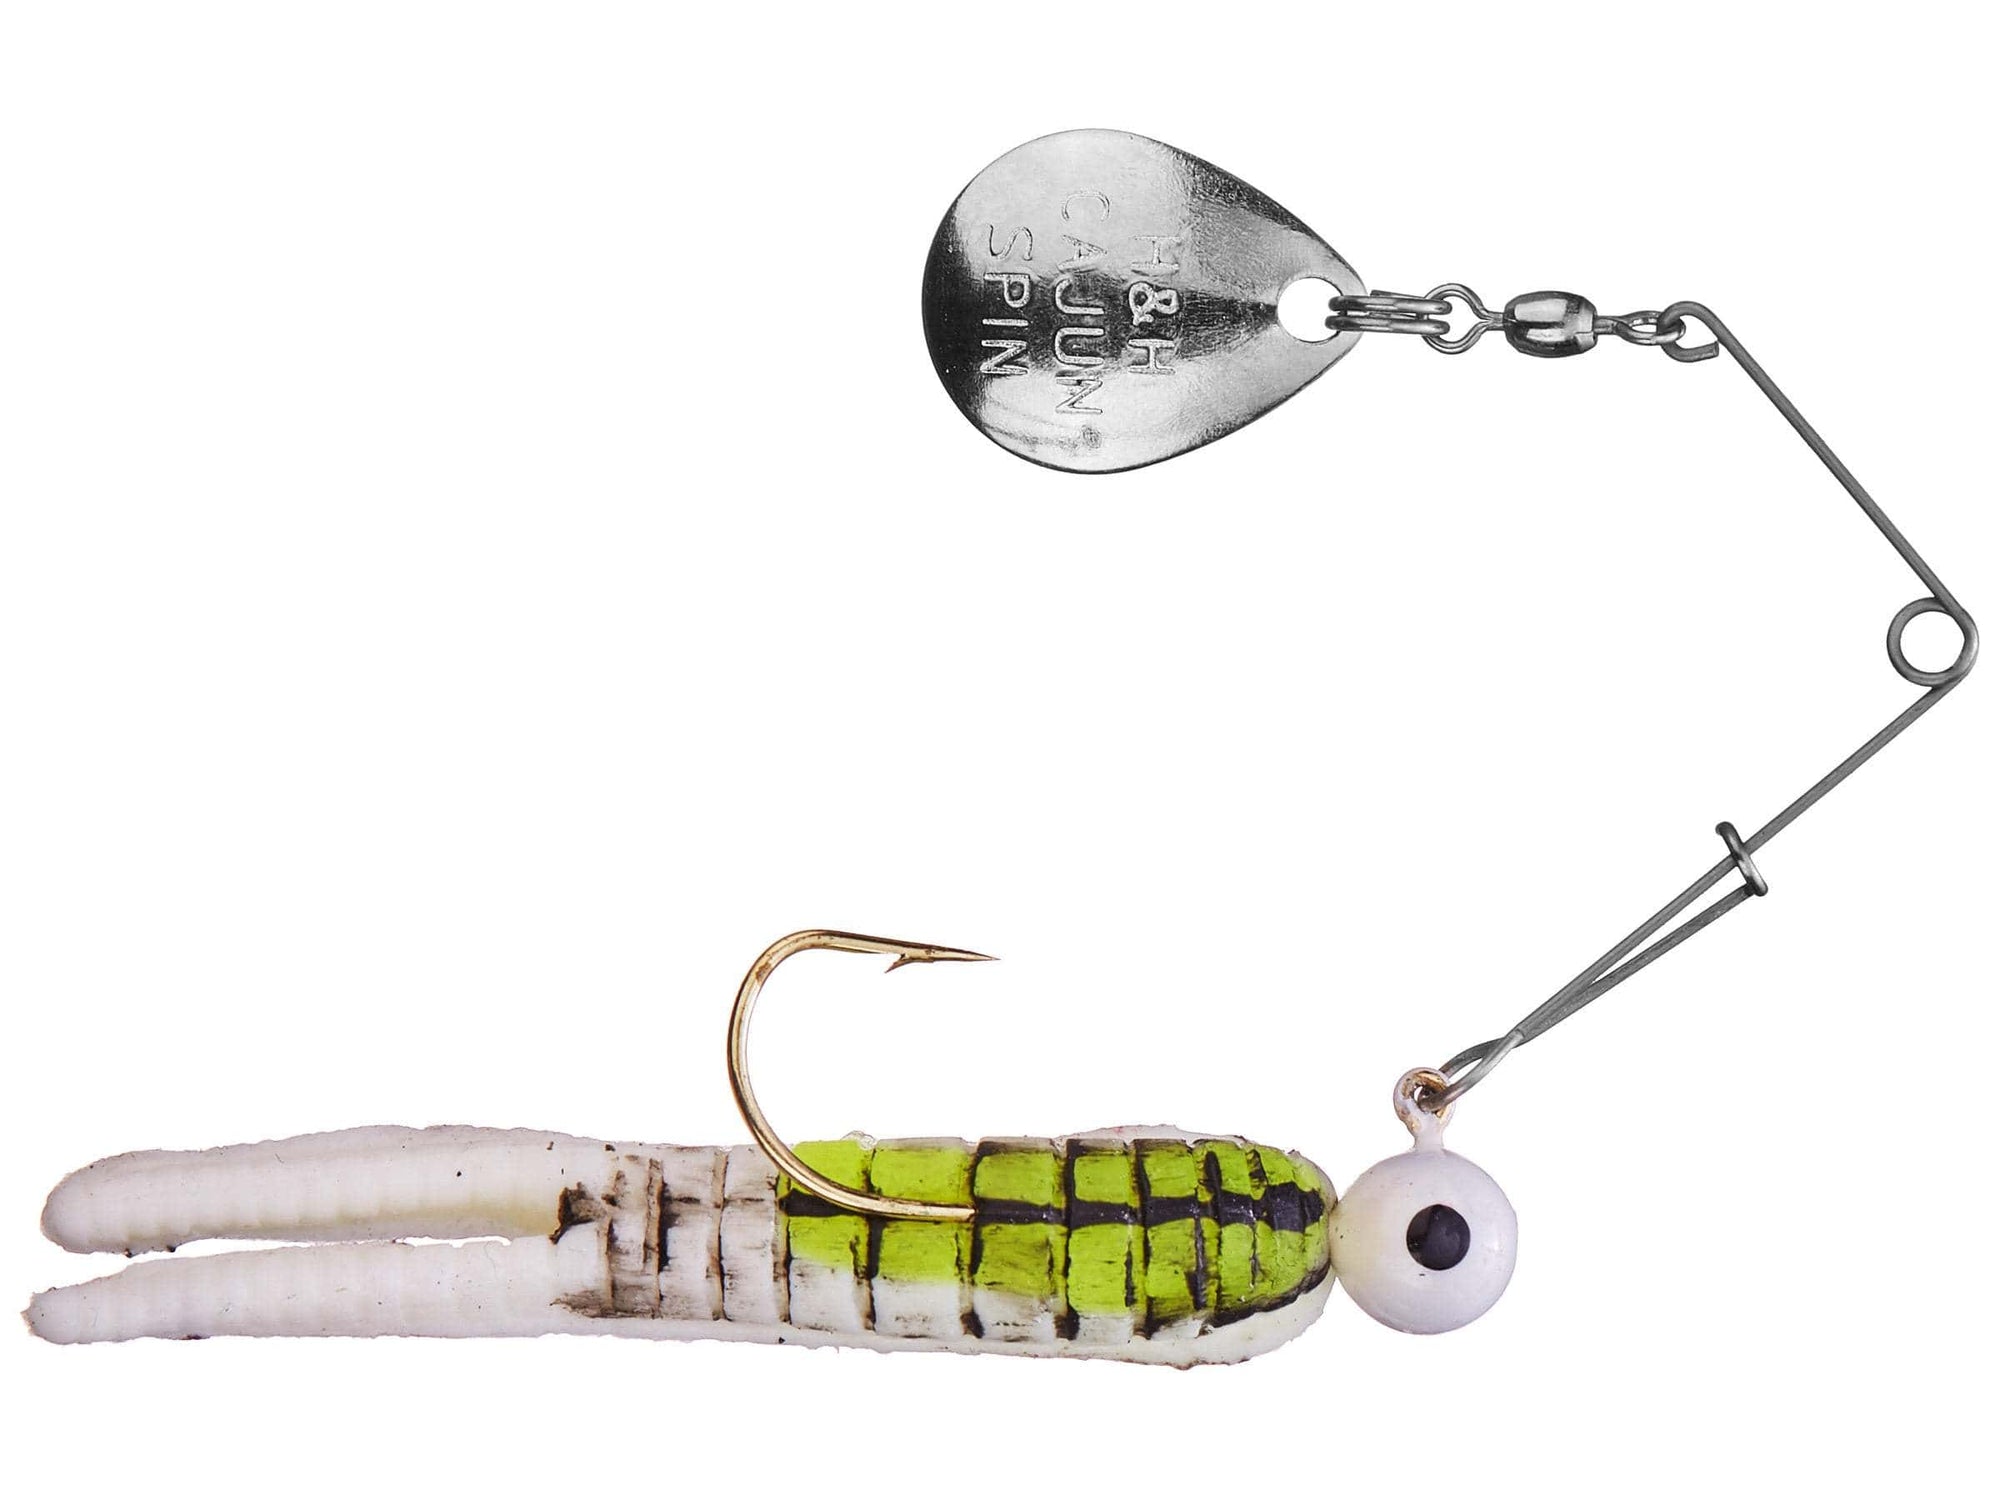 Moose Baits 1/8oz Curly Tail Grub Fishing Jigs, Round Ball Head Jig,  Panfish Softbait, Crappie Bait, Crappie Fishing Jig, Soft Plastic Worm  Swimbaits, Tackle for Crappie Bass Trout 7 Count (Black), Soft